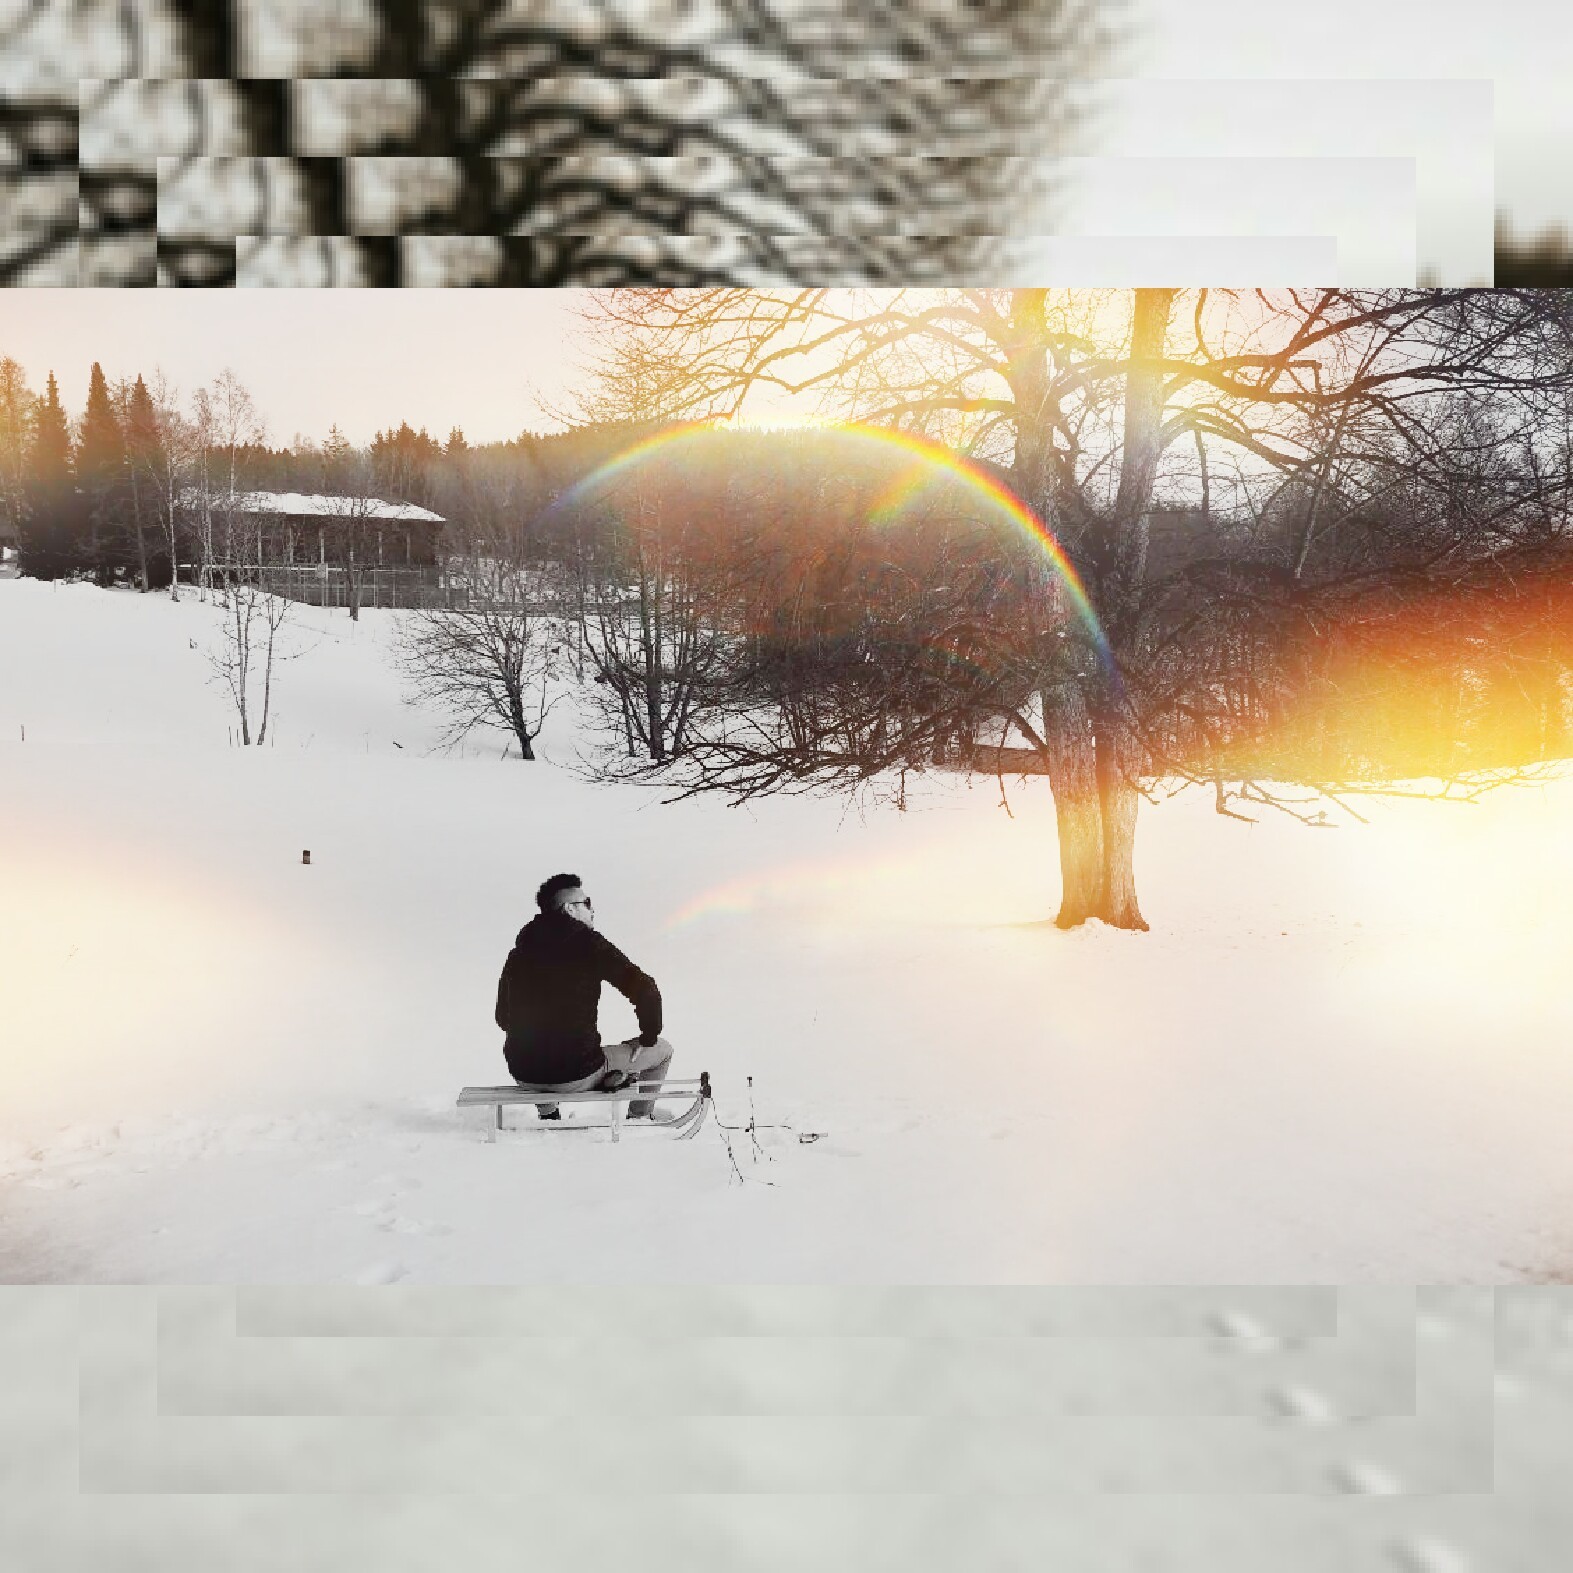 snow is, Abby Winters, Snow, Winter, Sun, Suns, Carriage Wallpaper